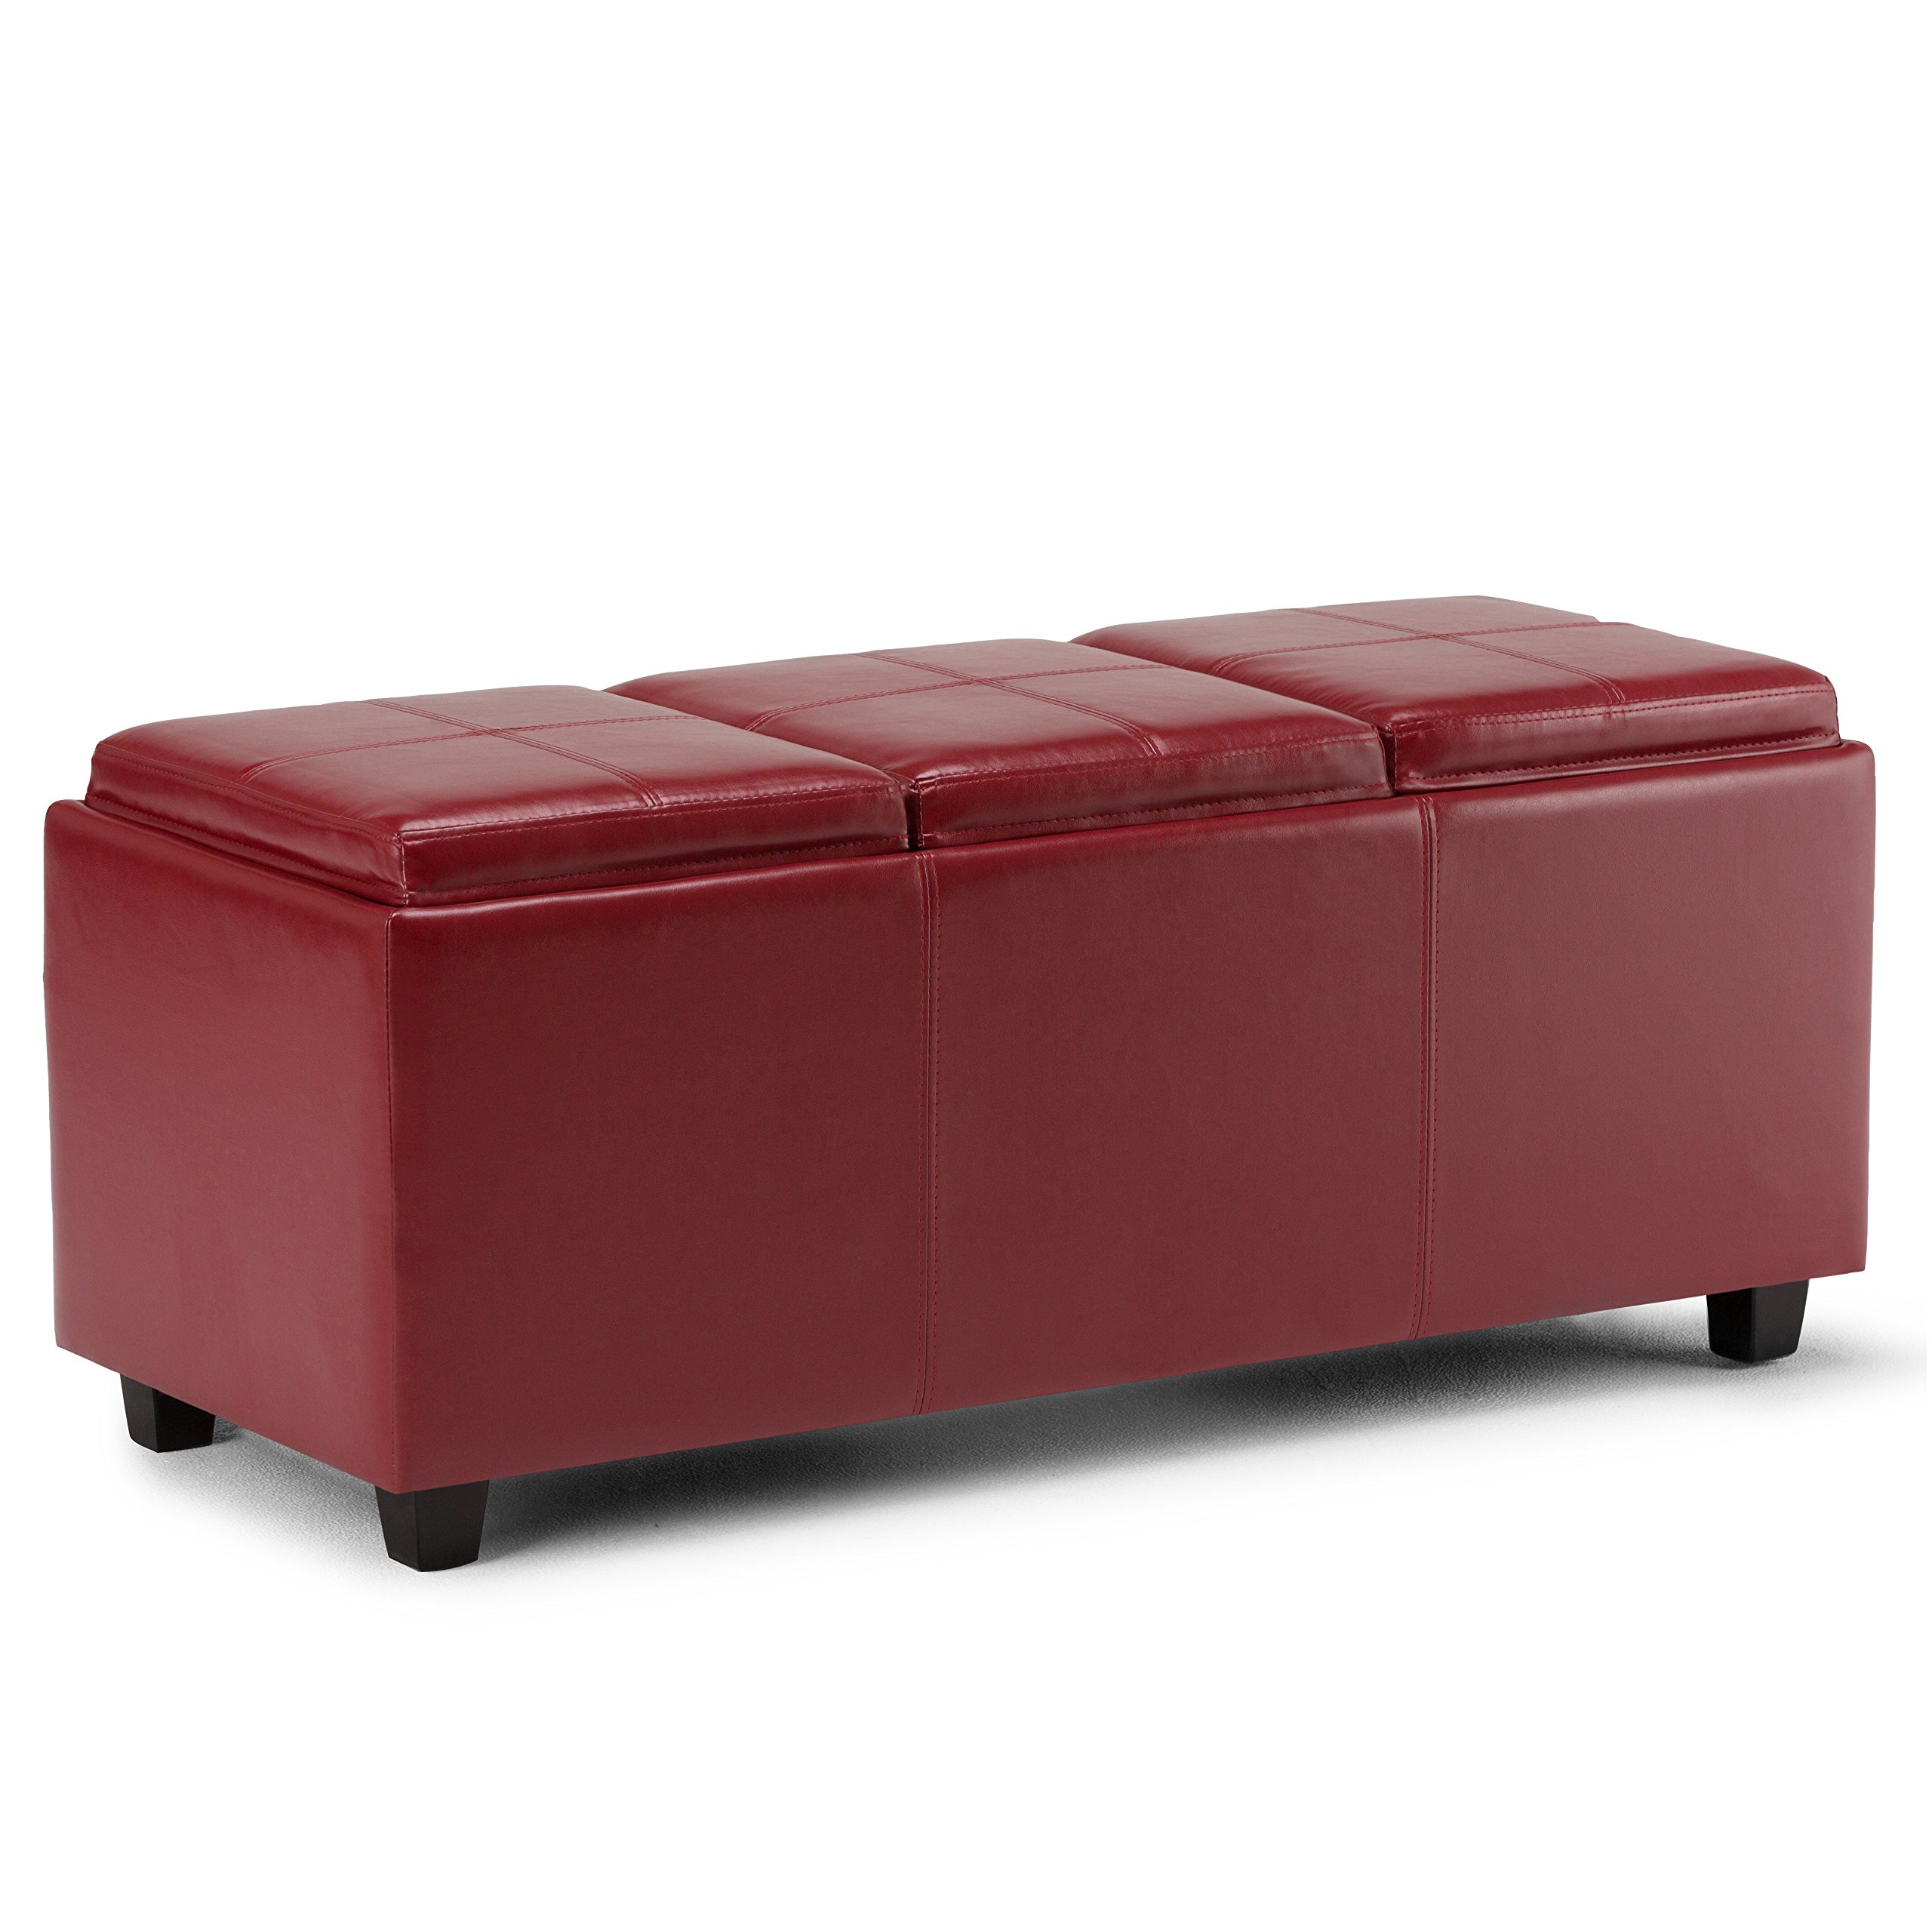 SIMPLIHOME Avalon 42 Inch Wide Contemporary Rectangle Storage Ottoman in Red Vegan Faux Leather, For the Living Room, Entryway a